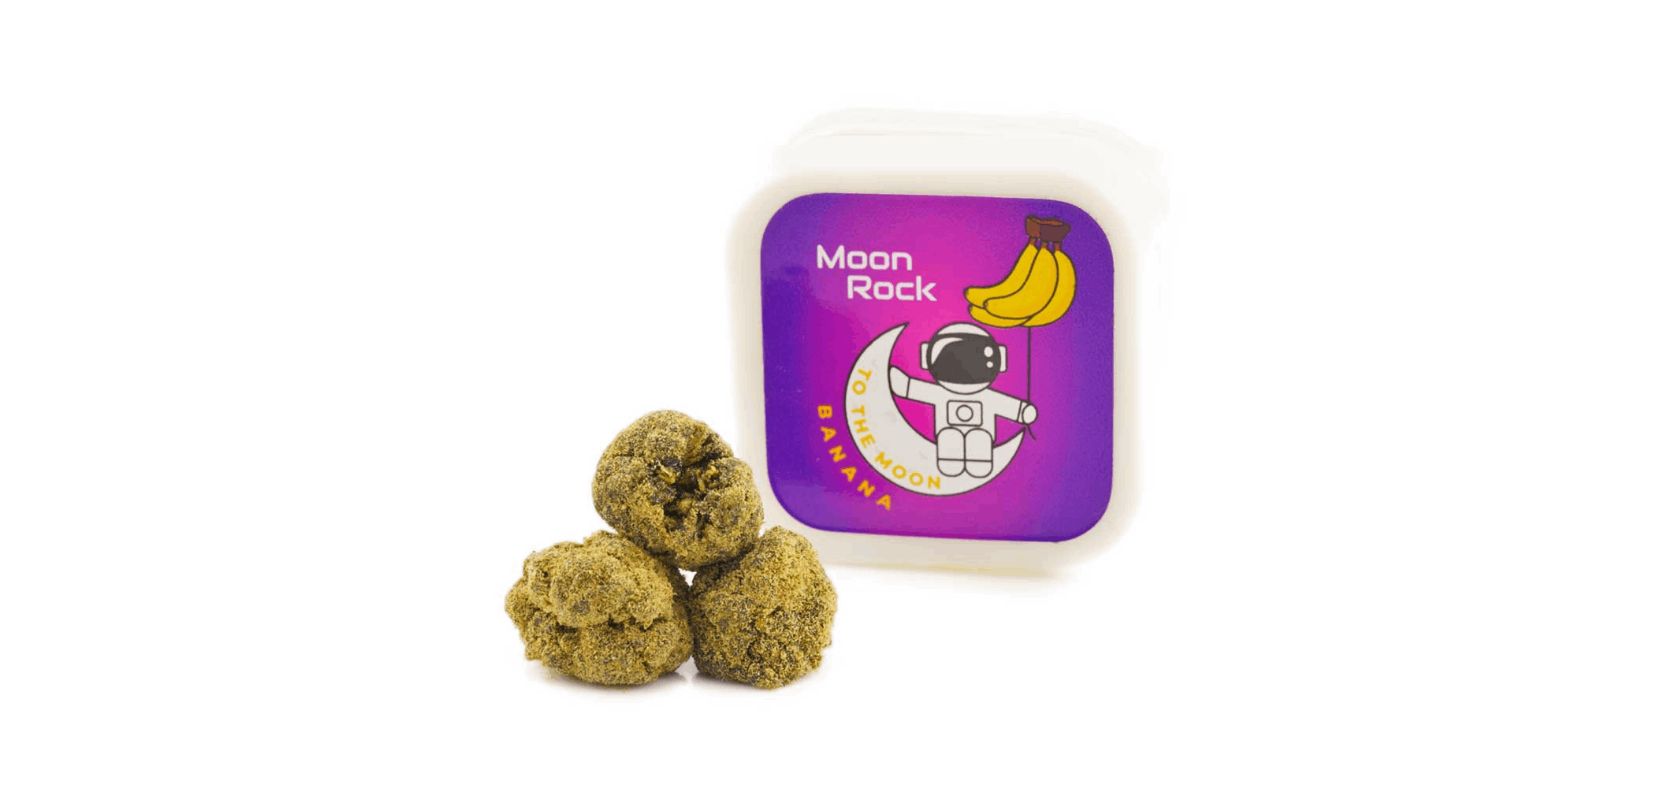 With sky-high moon rocks THC levels that will blow you away, this product is perfect for consumers who want to explore the galaxy of cannabis highs. 